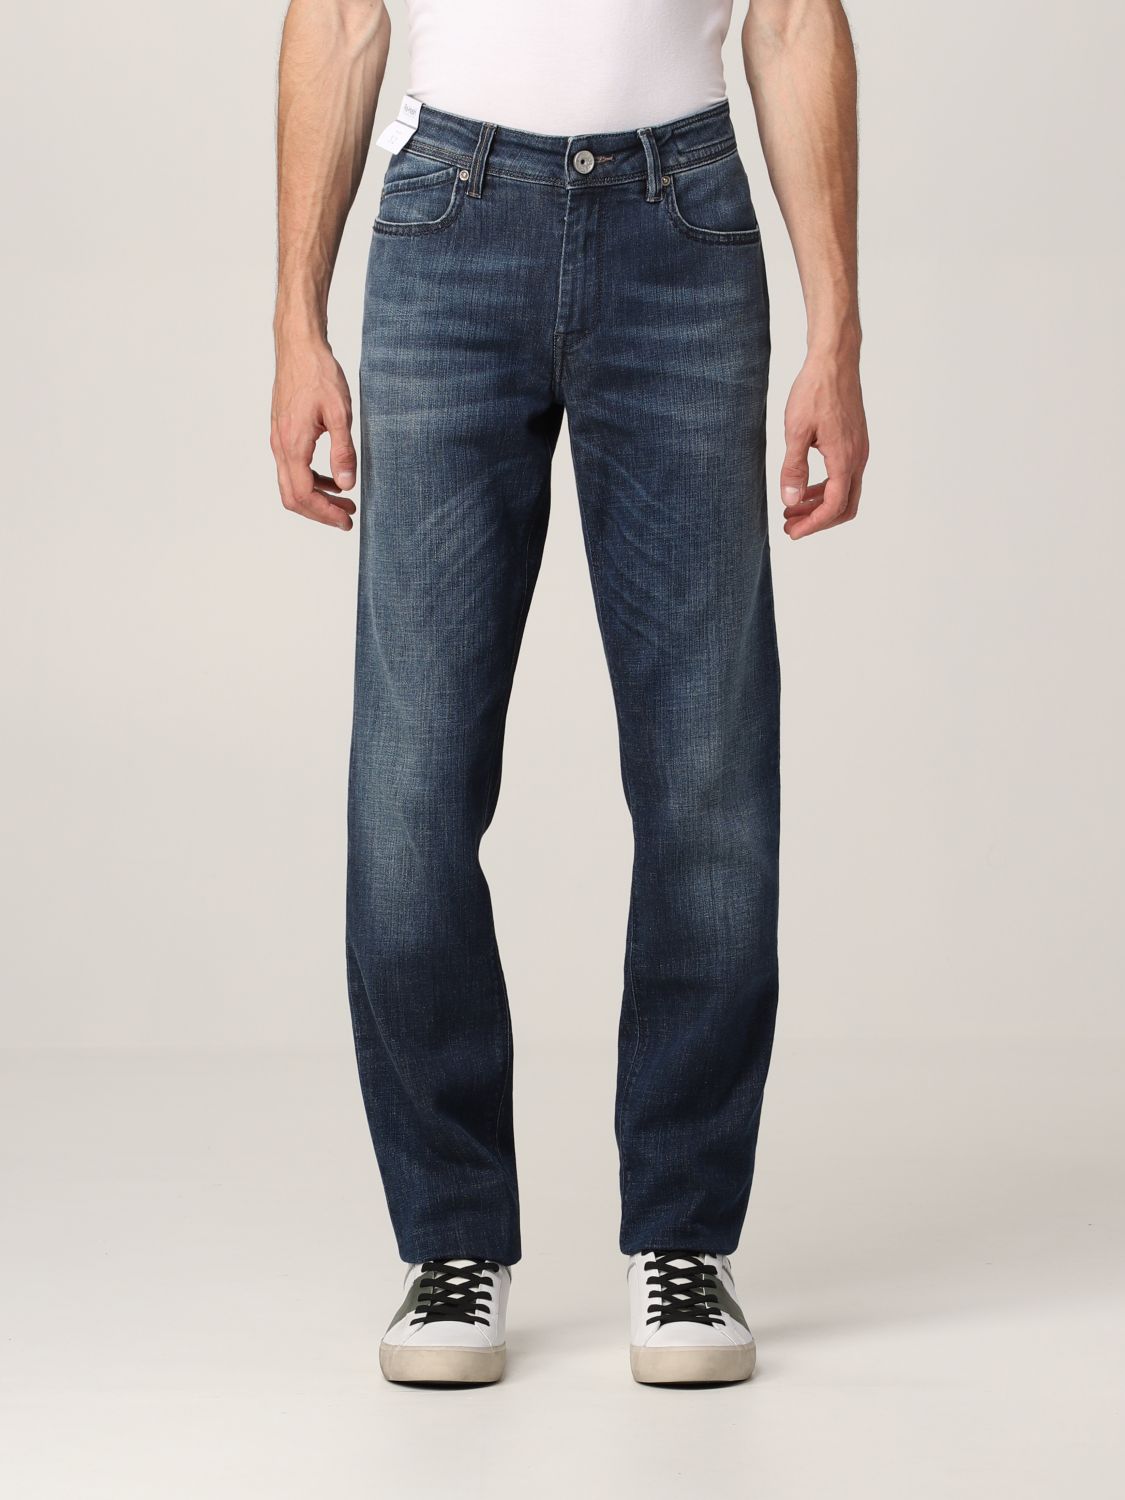 RE-HASH: Rubens jeans in washed denim - Blue | Re-Hash jeans P015 2858 ...